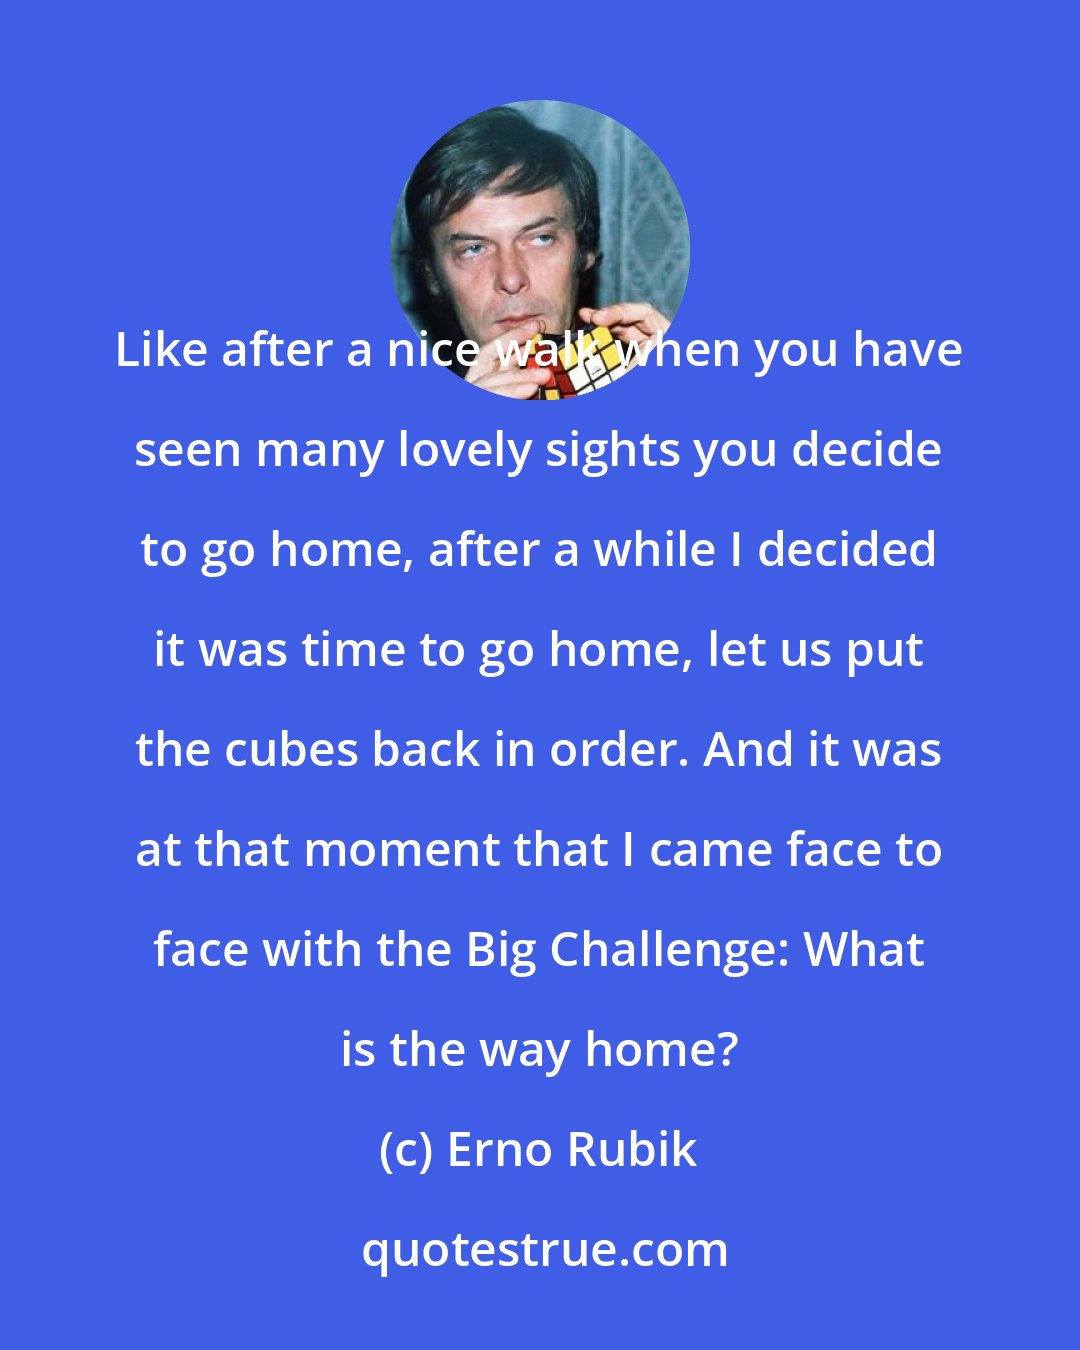 Erno Rubik: Like after a nice walk when you have seen many lovely sights you decide to go home, after a while I decided it was time to go home, let us put the cubes back in order. And it was at that moment that I came face to face with the Big Challenge: What is the way home?